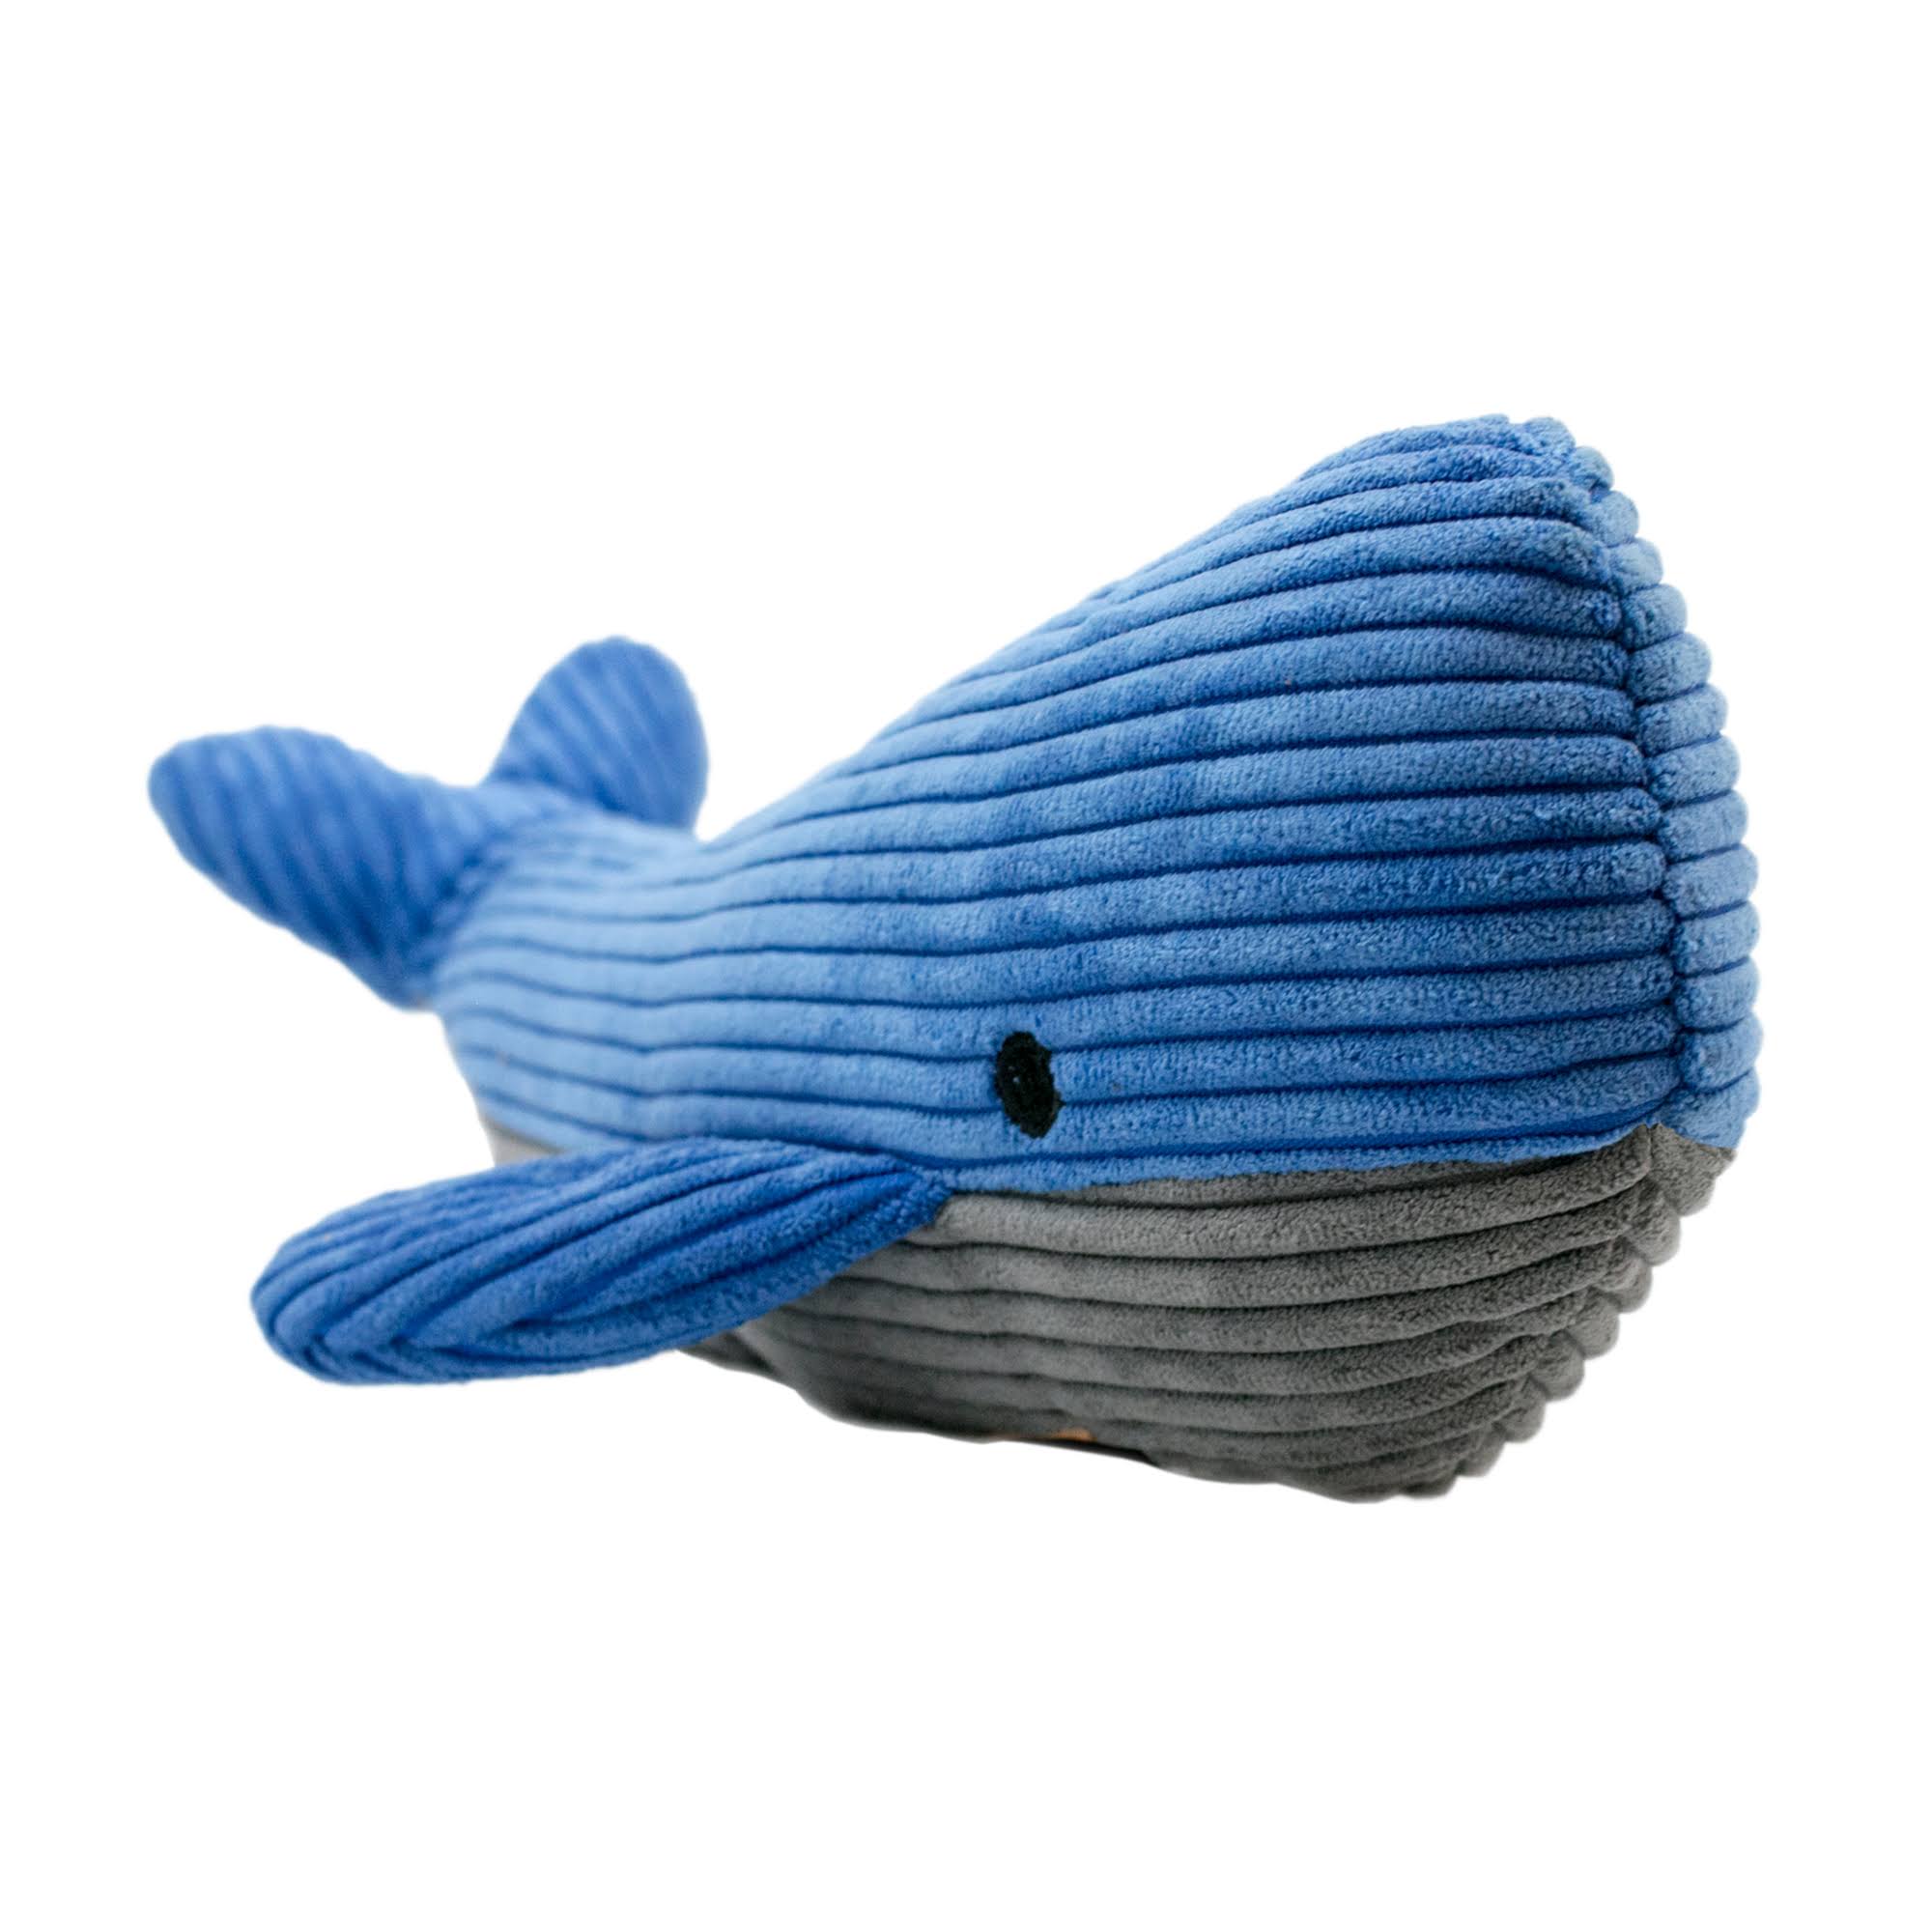 Tall Tails Dog Toy - Plush Whale Squeaker